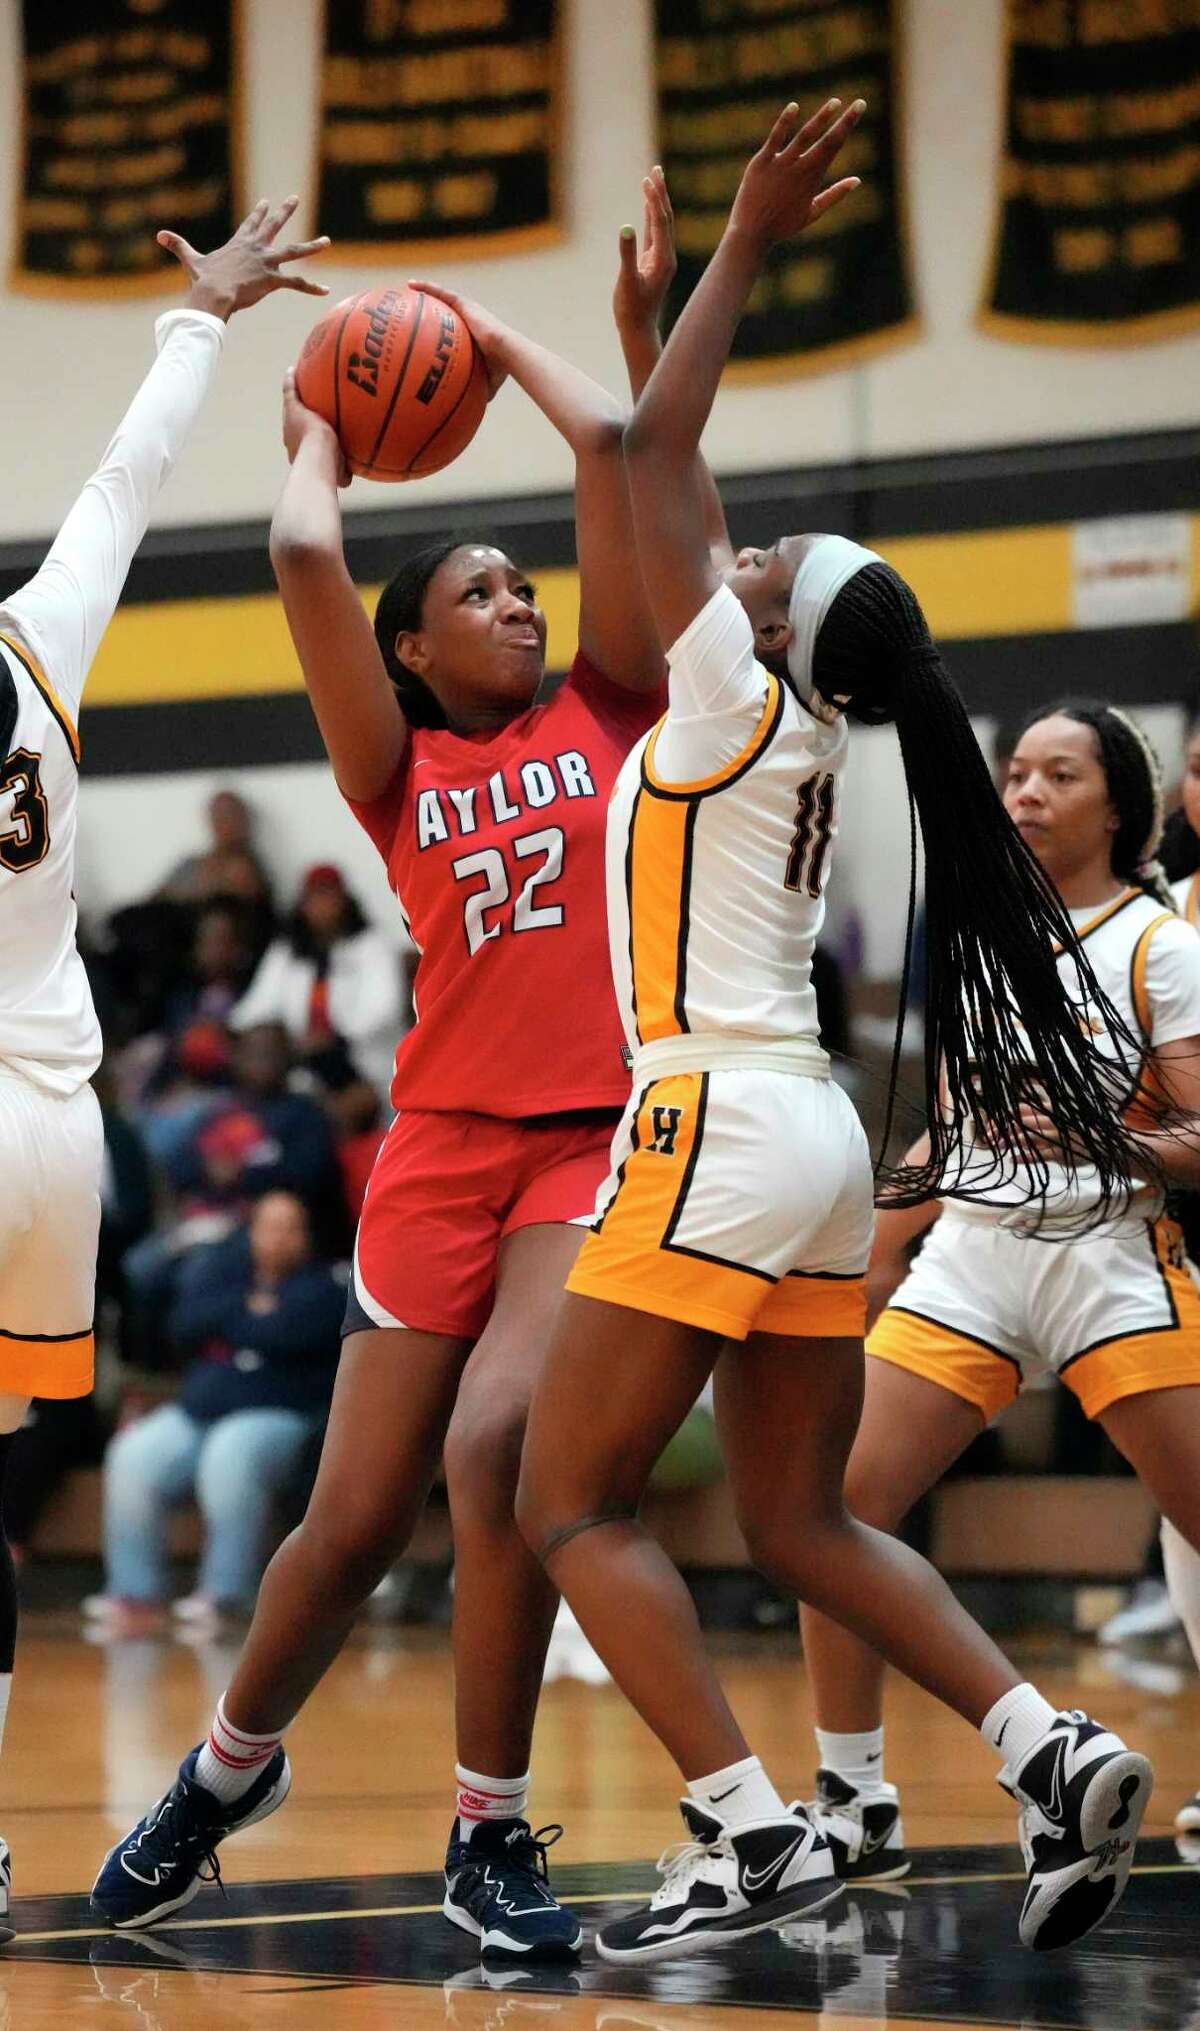 Alief Taylor's Nataliyah Gray (22) scored 24 points in her team's 45-41 bi-district playoff loss to Clear Brook on Tuesday night.